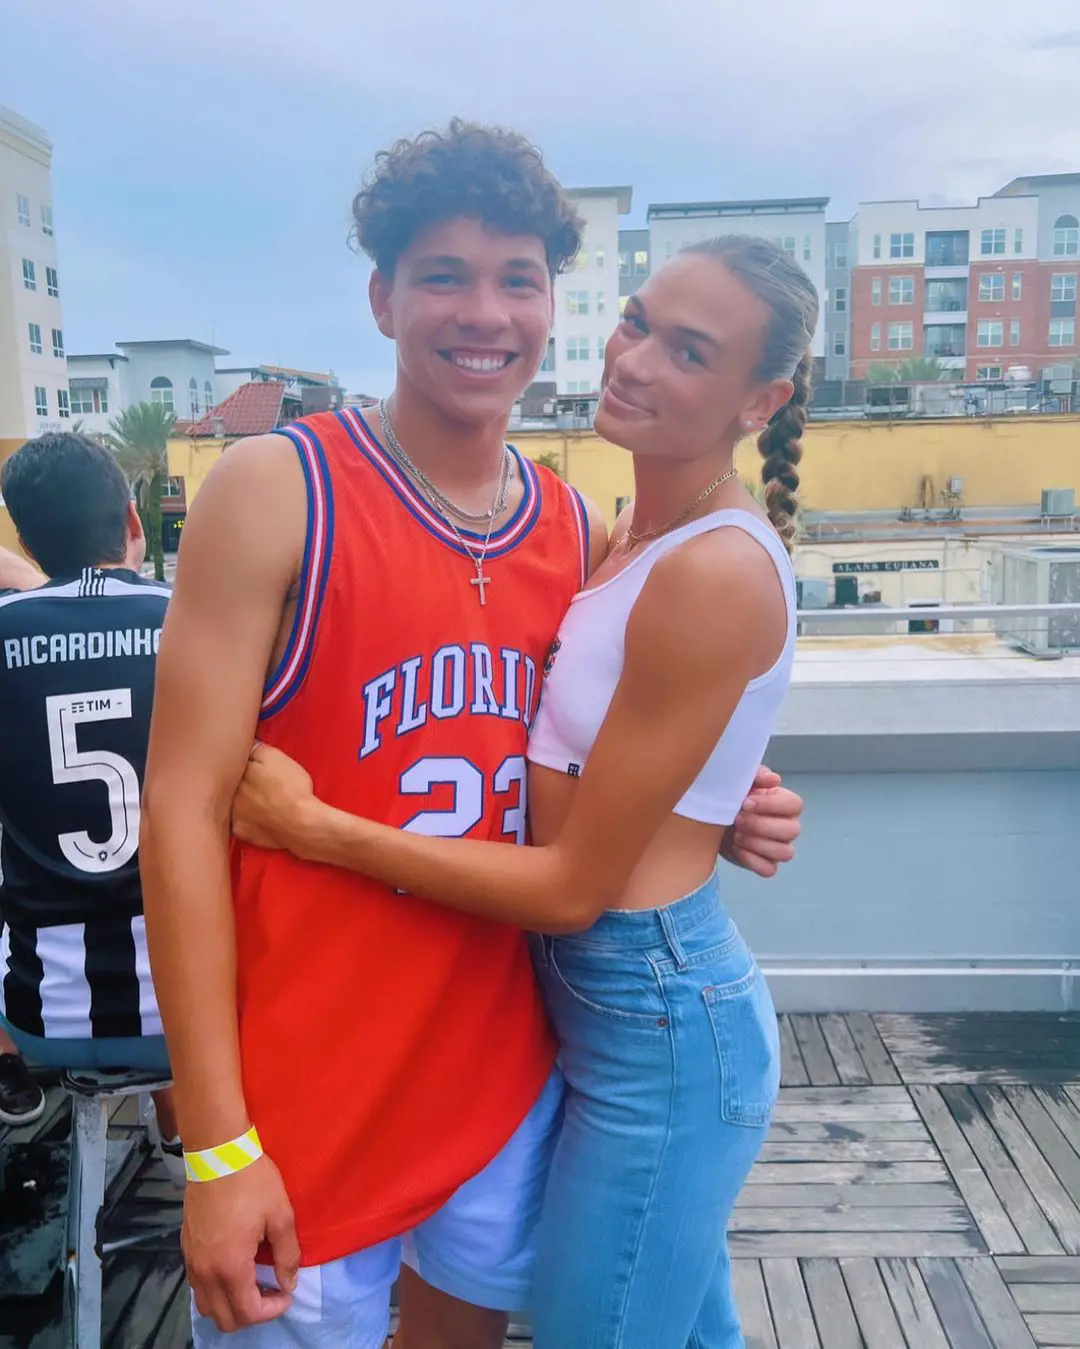 Shelton and his partner, Hall, attending match together at  University of Florida, on September 11, 2022